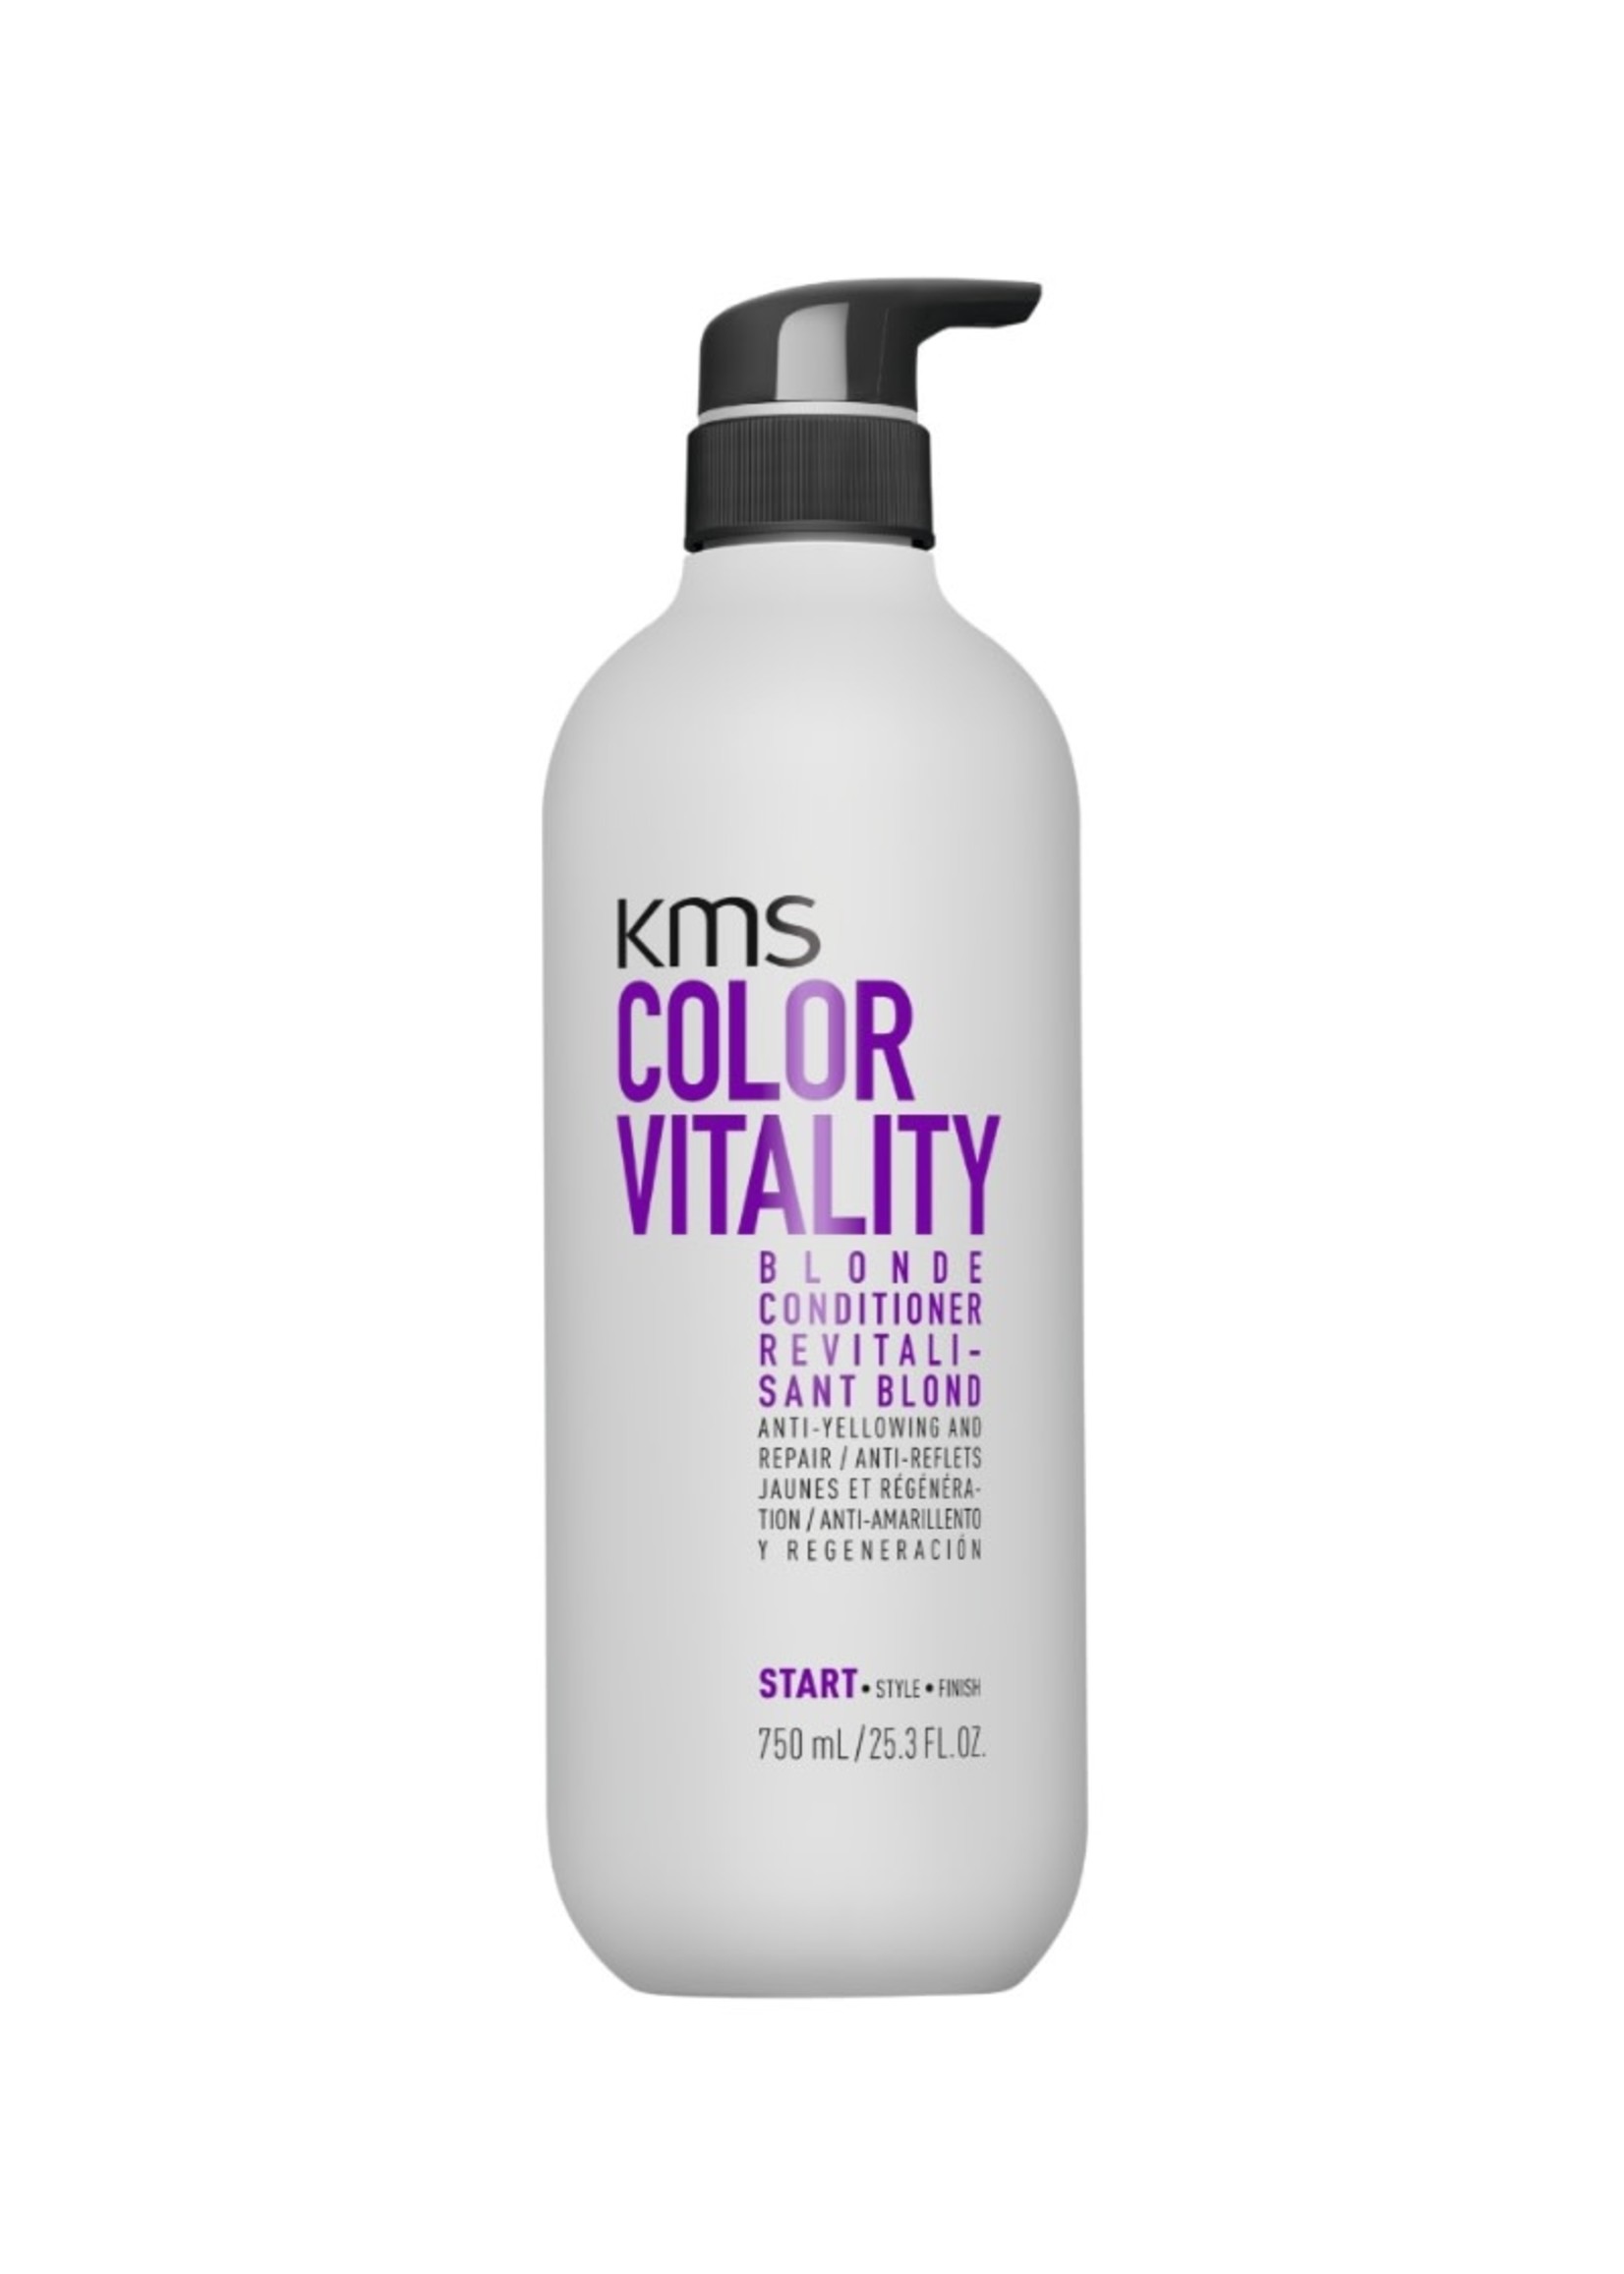 KMS KMS Colorvitality Blonde Conditioner 750ml